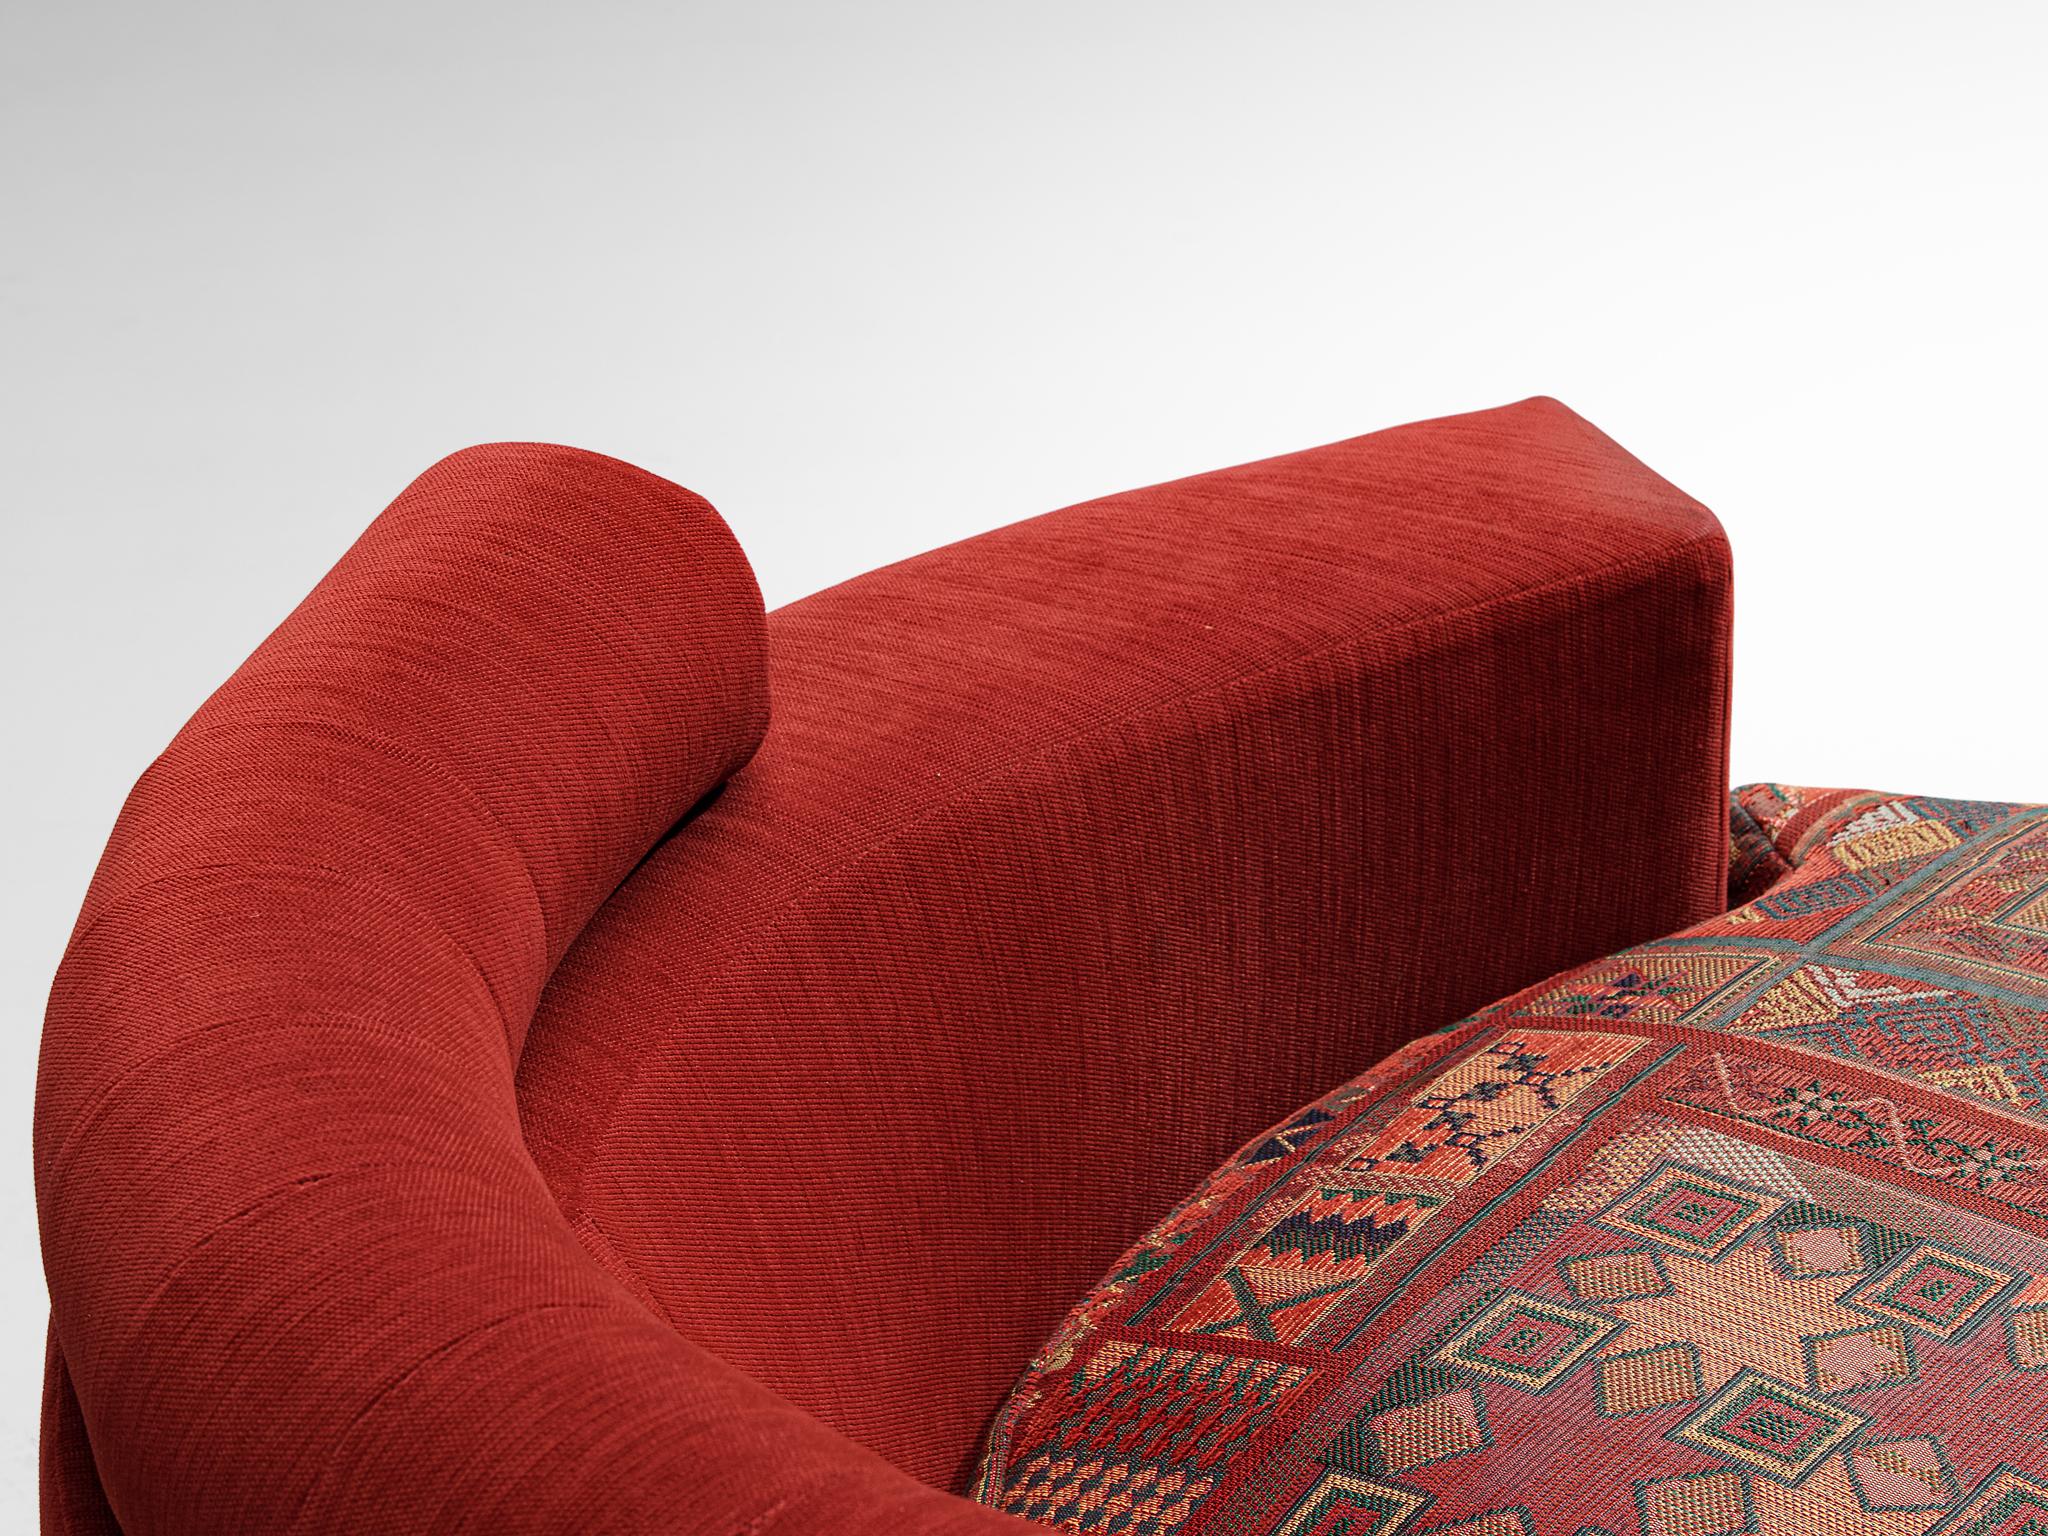 French Roche Bobois Pair of Lounge Chairs in Red and Patterned Upholstery For Sale